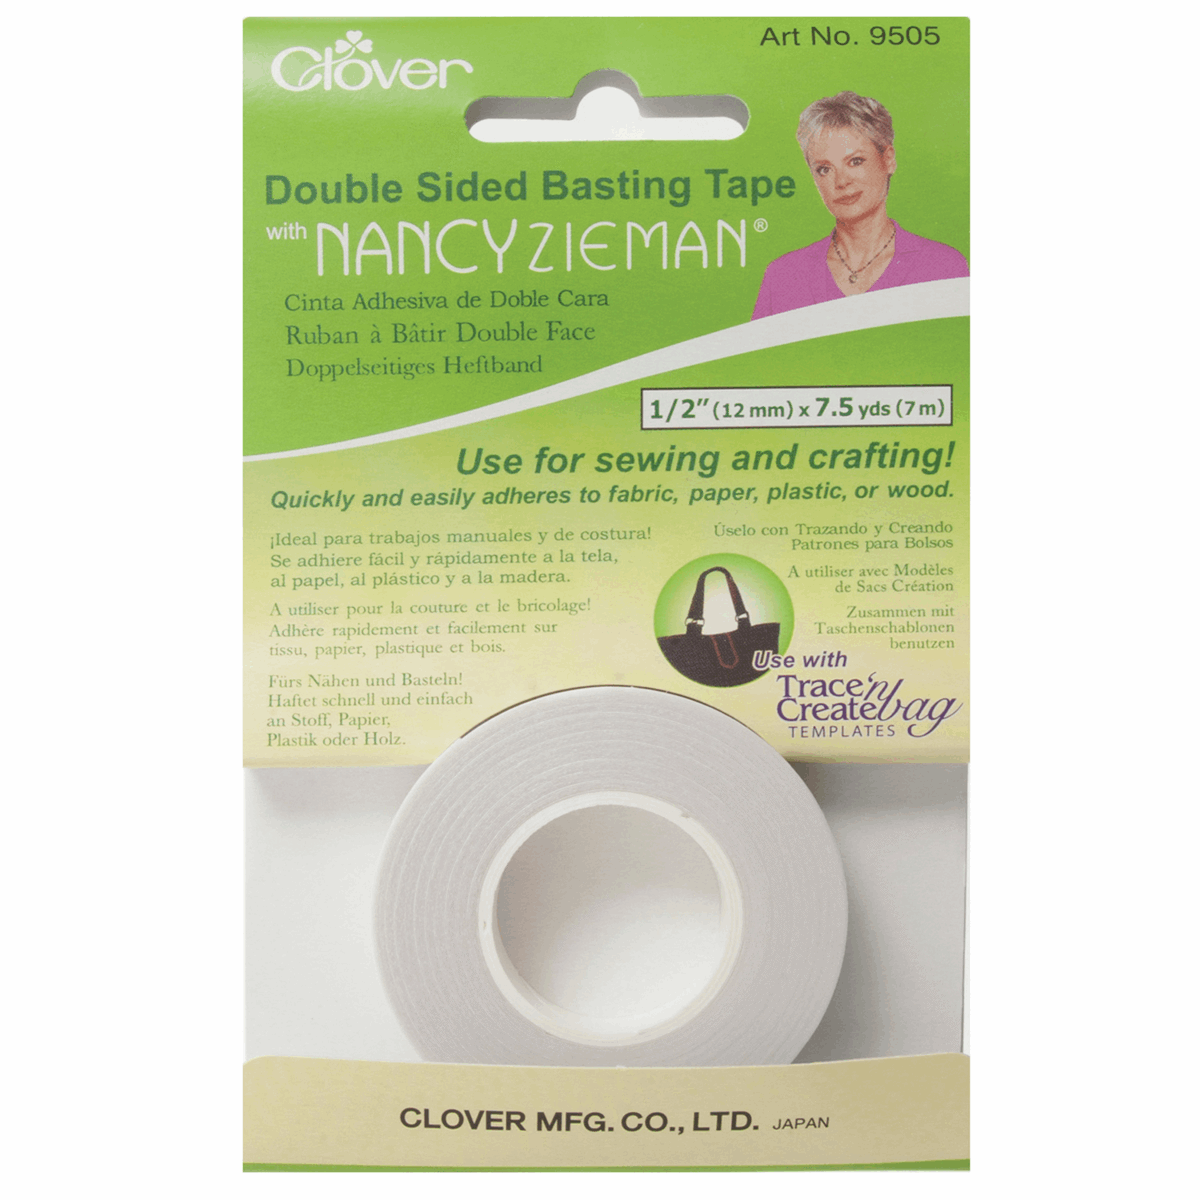 Clover Adhesive Double Sided Basting Tape